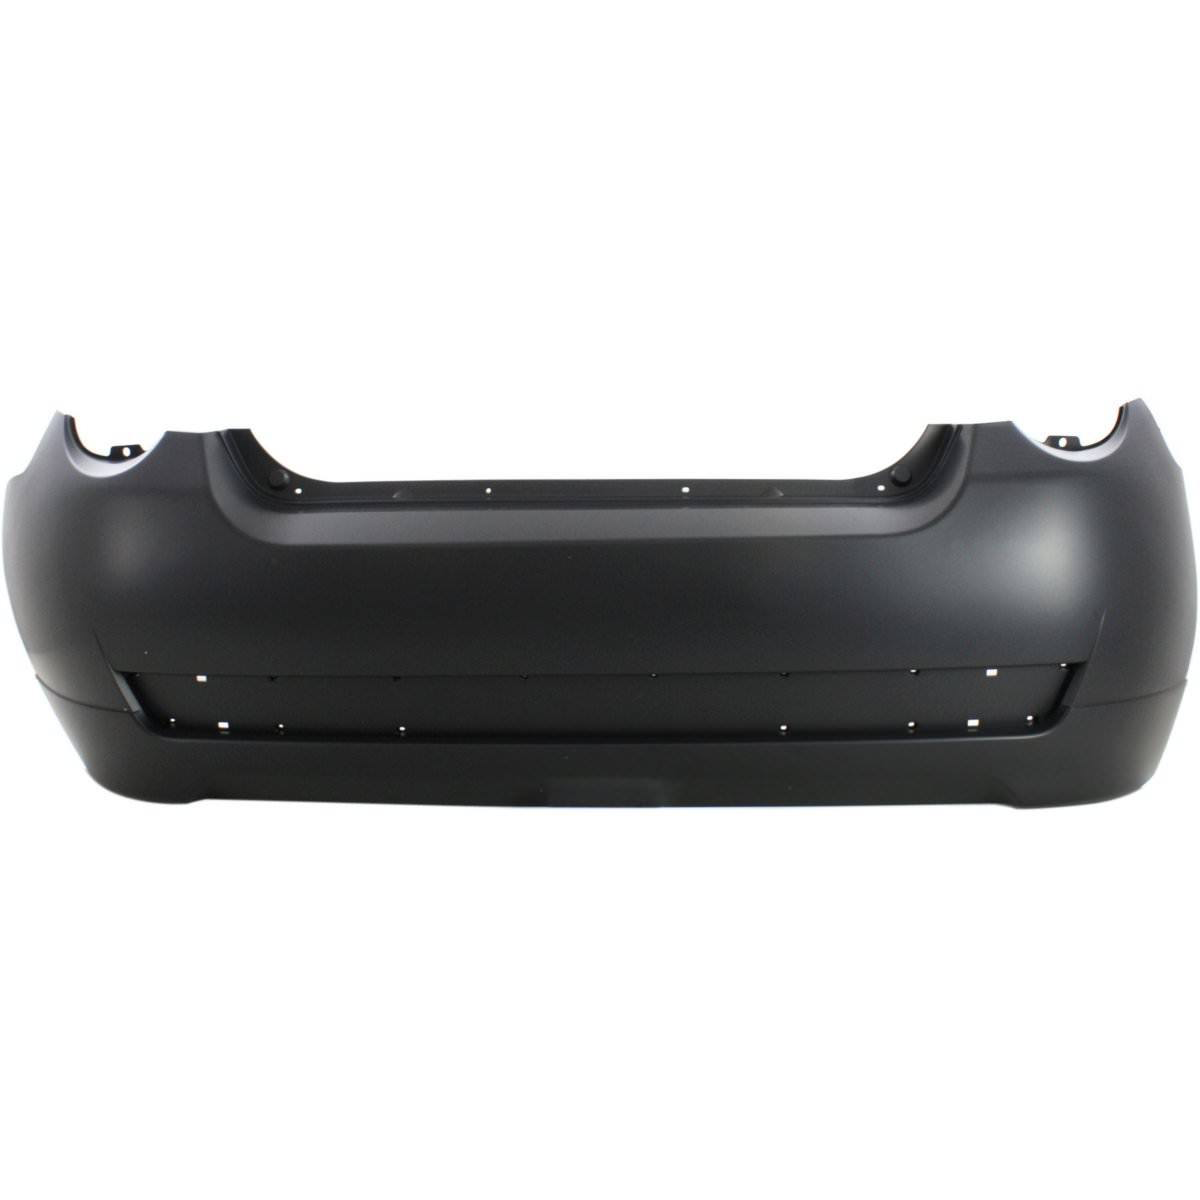 2009-2011 CHEVY AVEO 5 Rear Bumper Cover Painted to Match